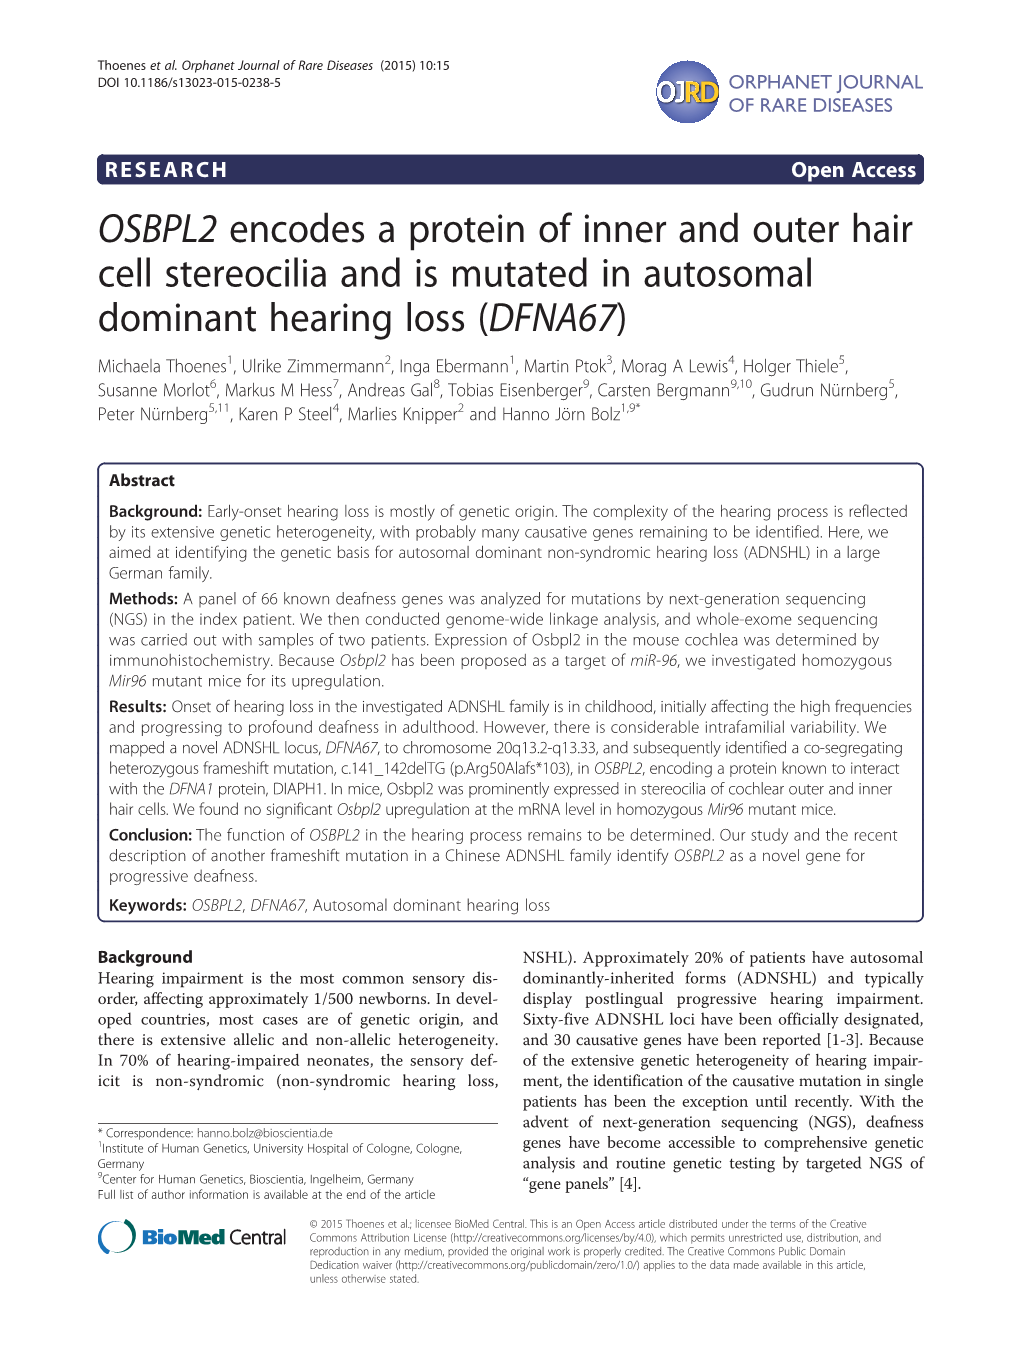 OSBPL2 Encodes a Protein of Inner and Outer Hair Cell